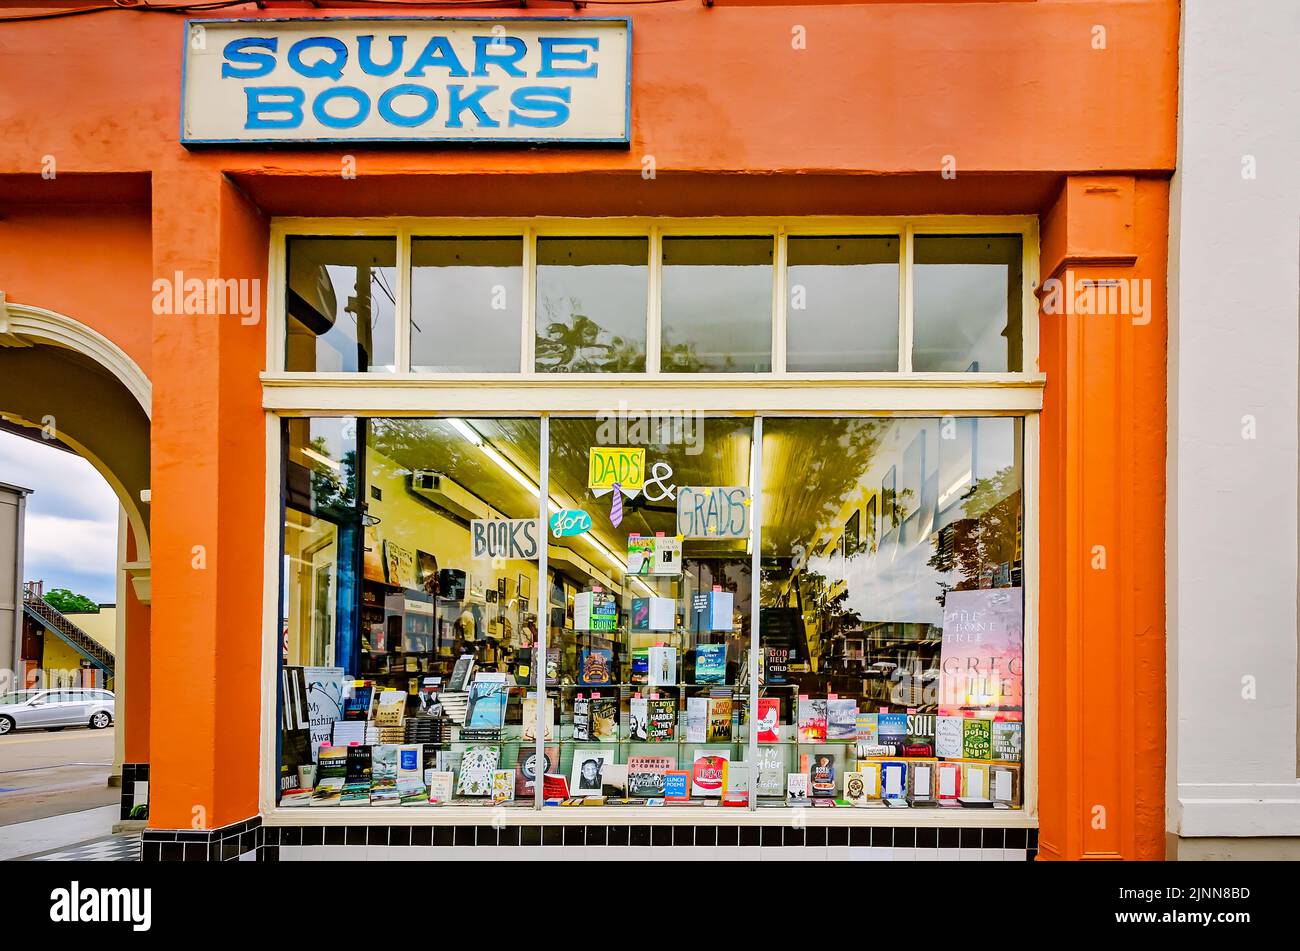 Square Books is pictured, May 31, 2015, in Oxford, Mississippi. The family-owned bookstore was founded in 1979 by Richard and Lisa Howorth. Stock Photo